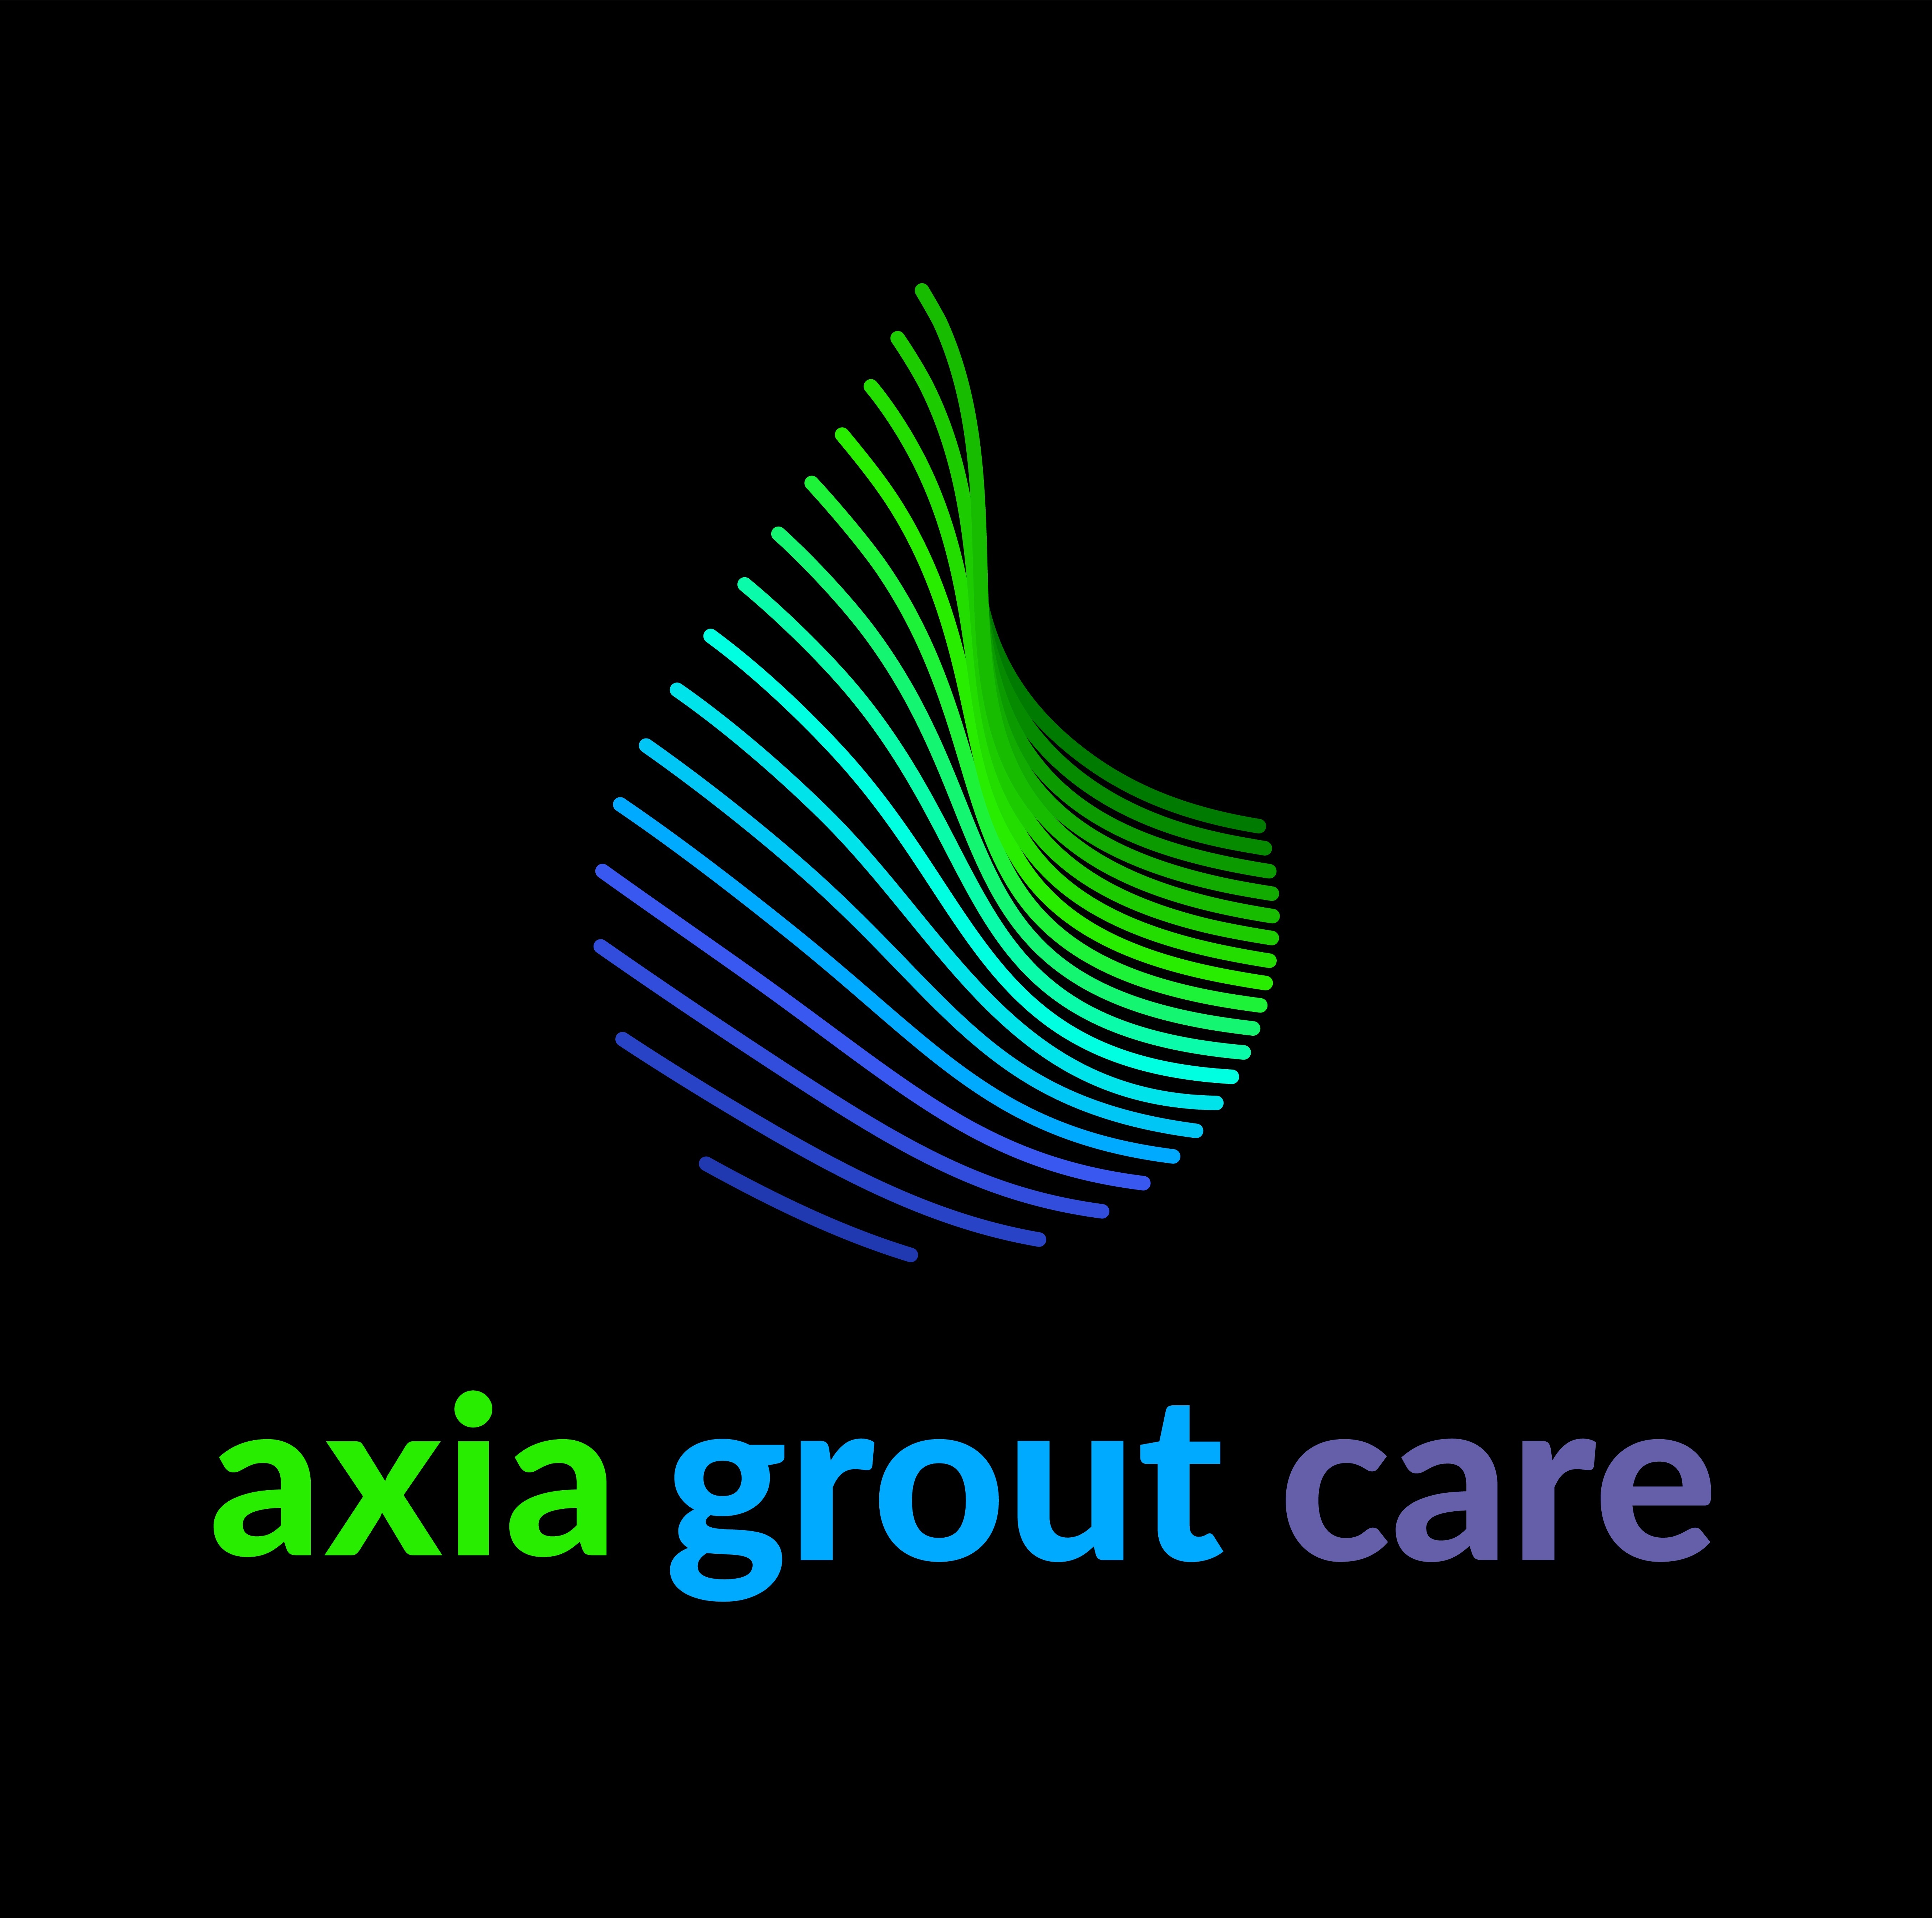 Axia Grout Care's logo